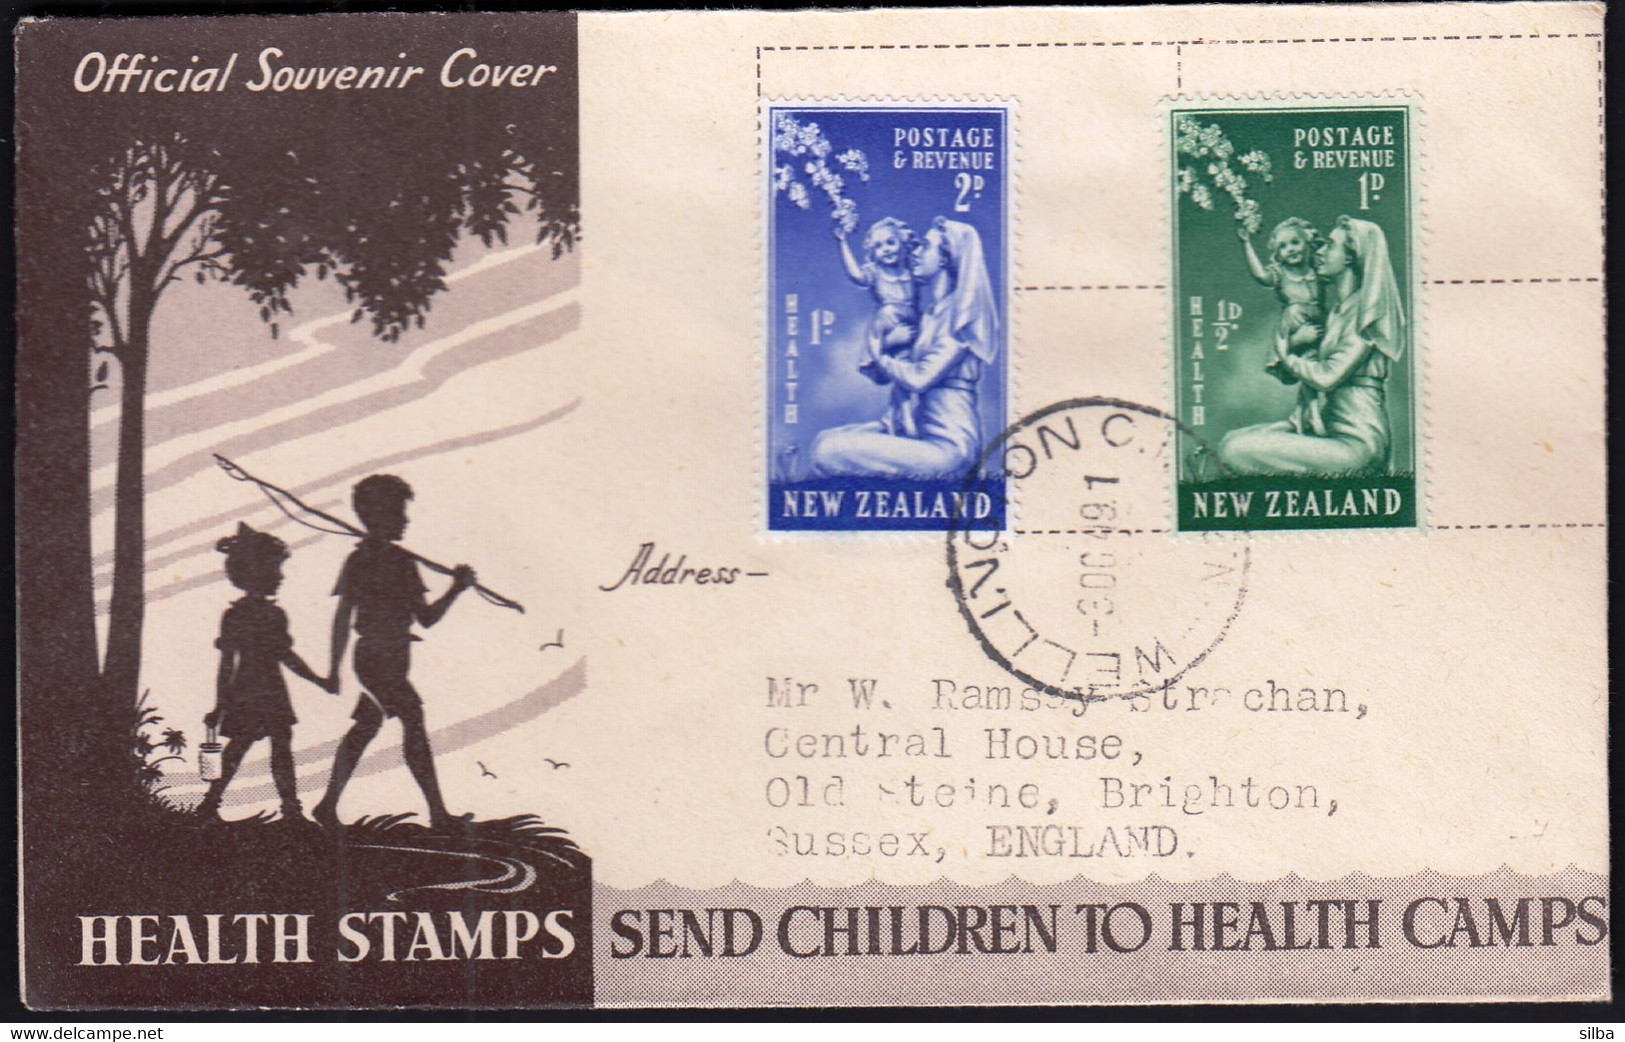 New Zealand Wellington 1949 / Health Stamps / Children's Health Camps - Covers & Documents